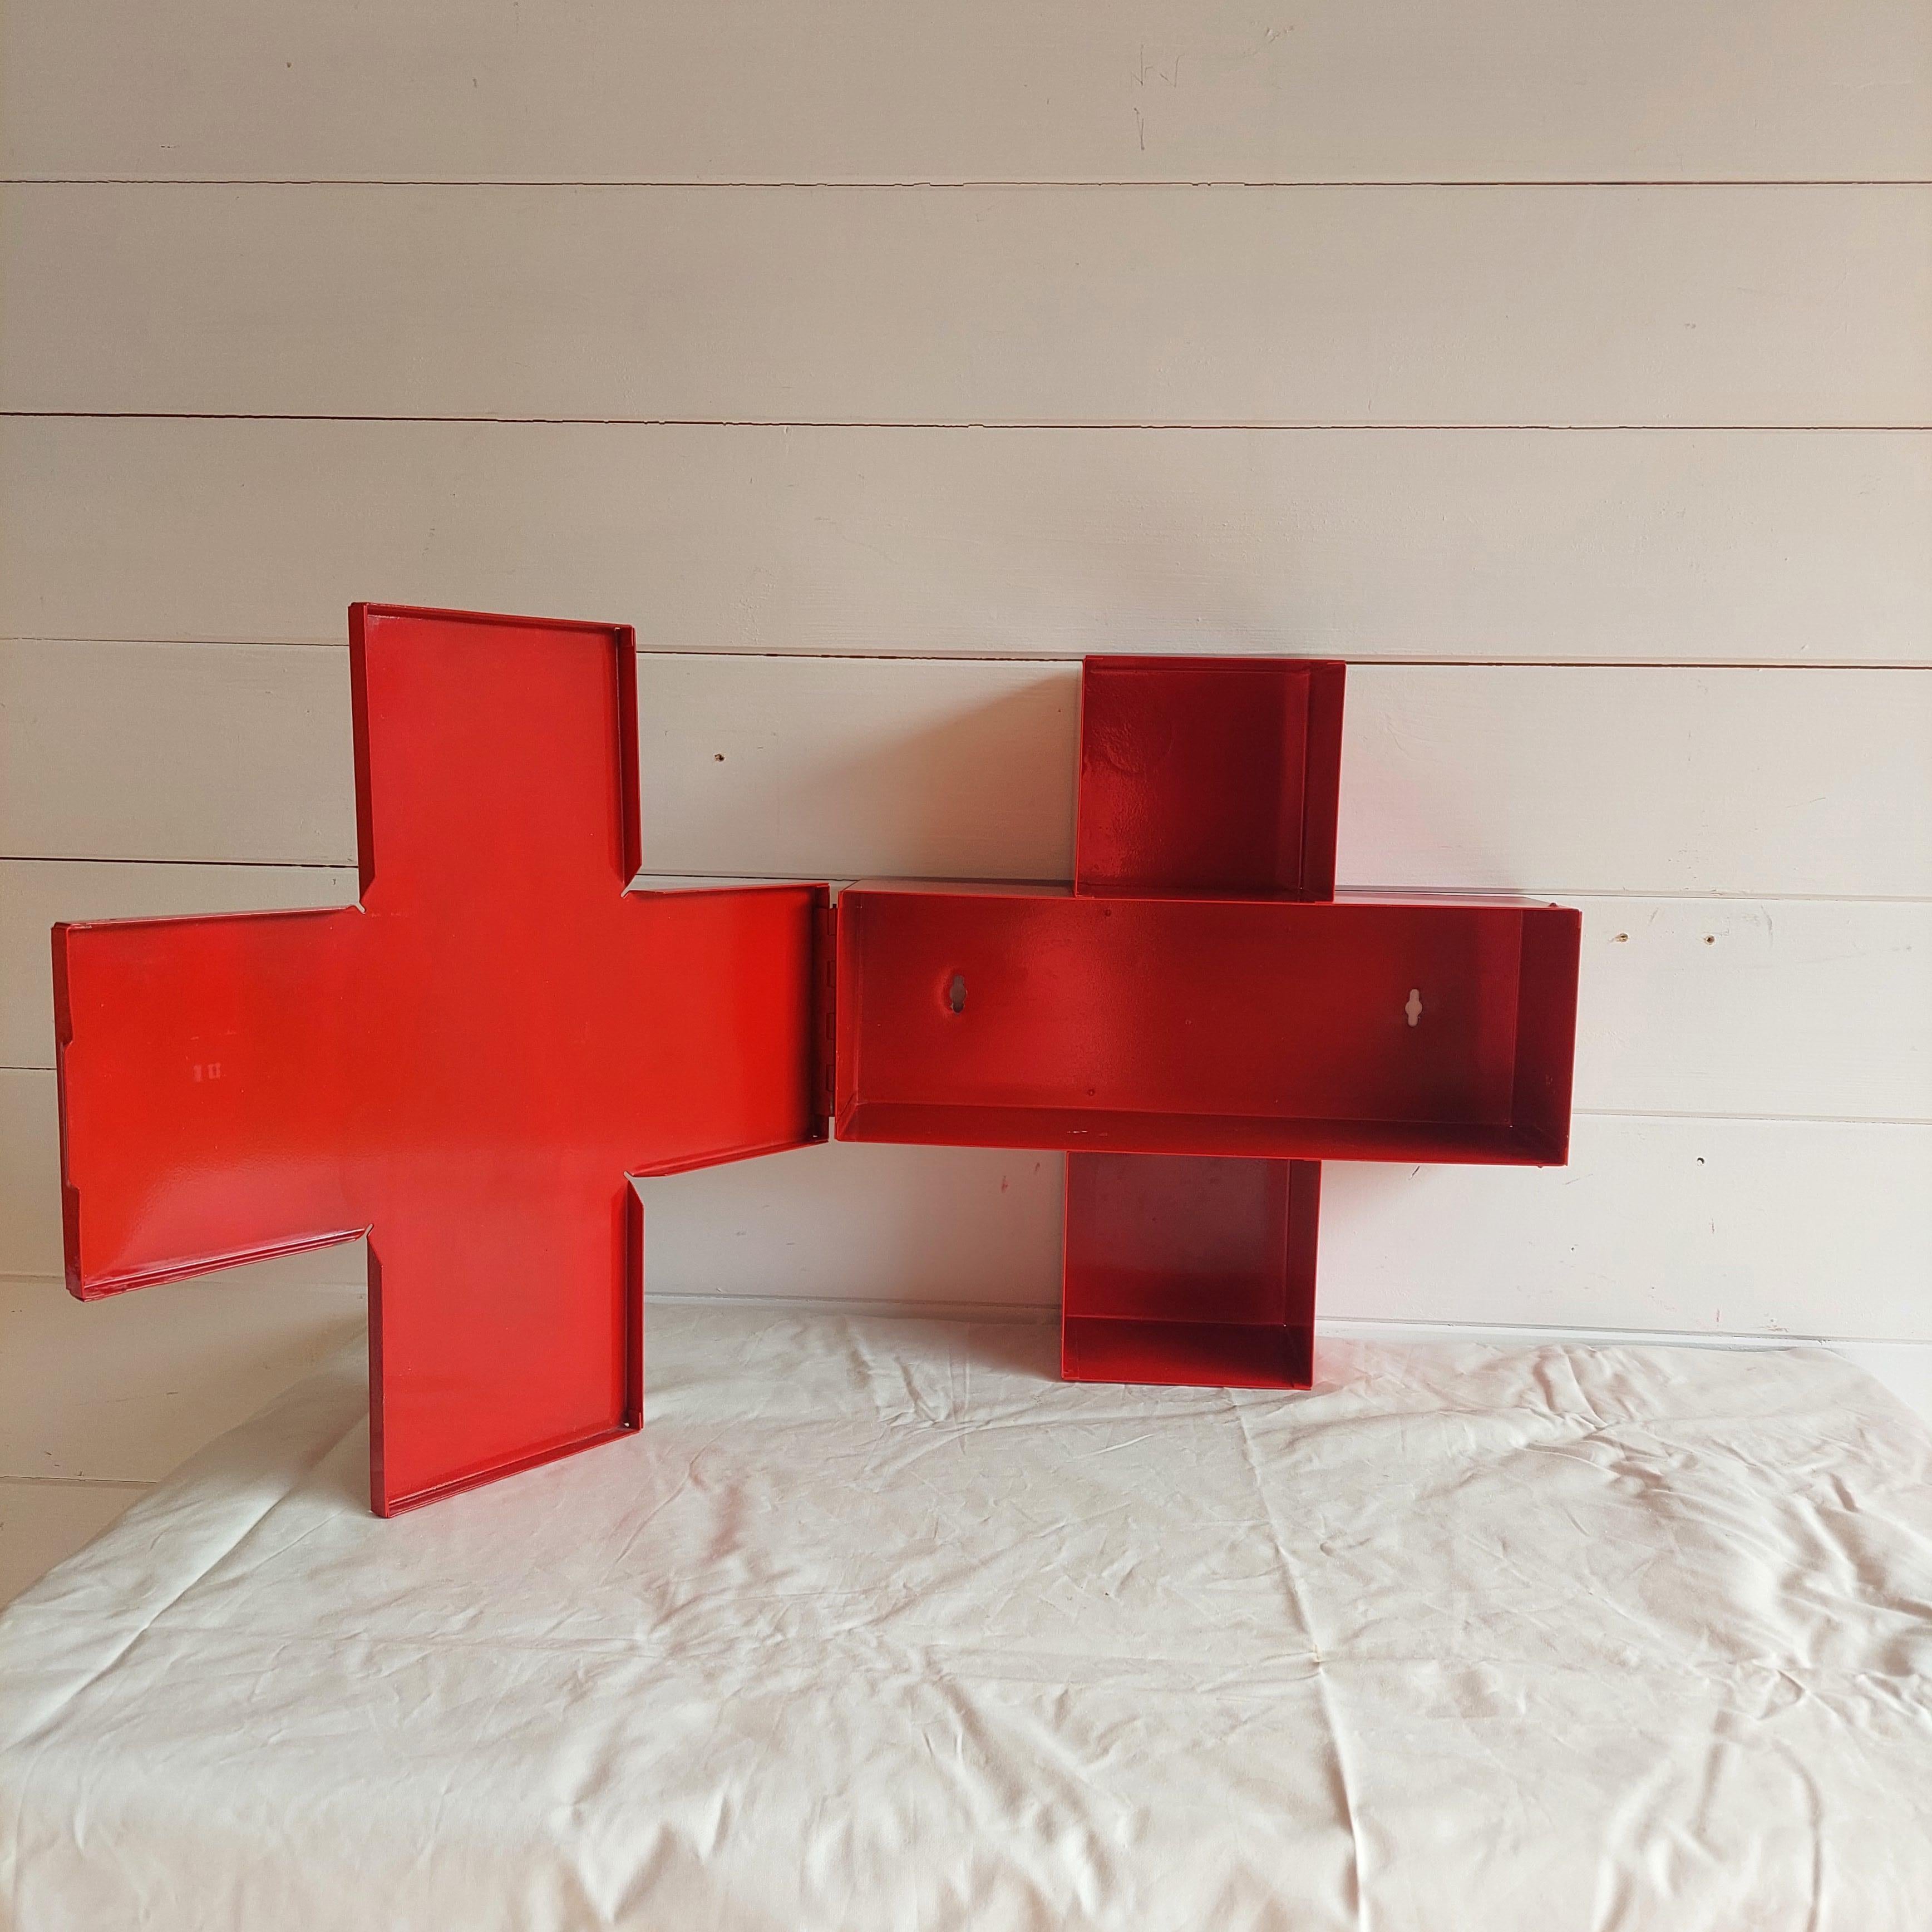 Late 20th Century Red Metal Cross Wall Cabinet 1st Aid Medicine Box, Thomas Eriksson Style 1990s